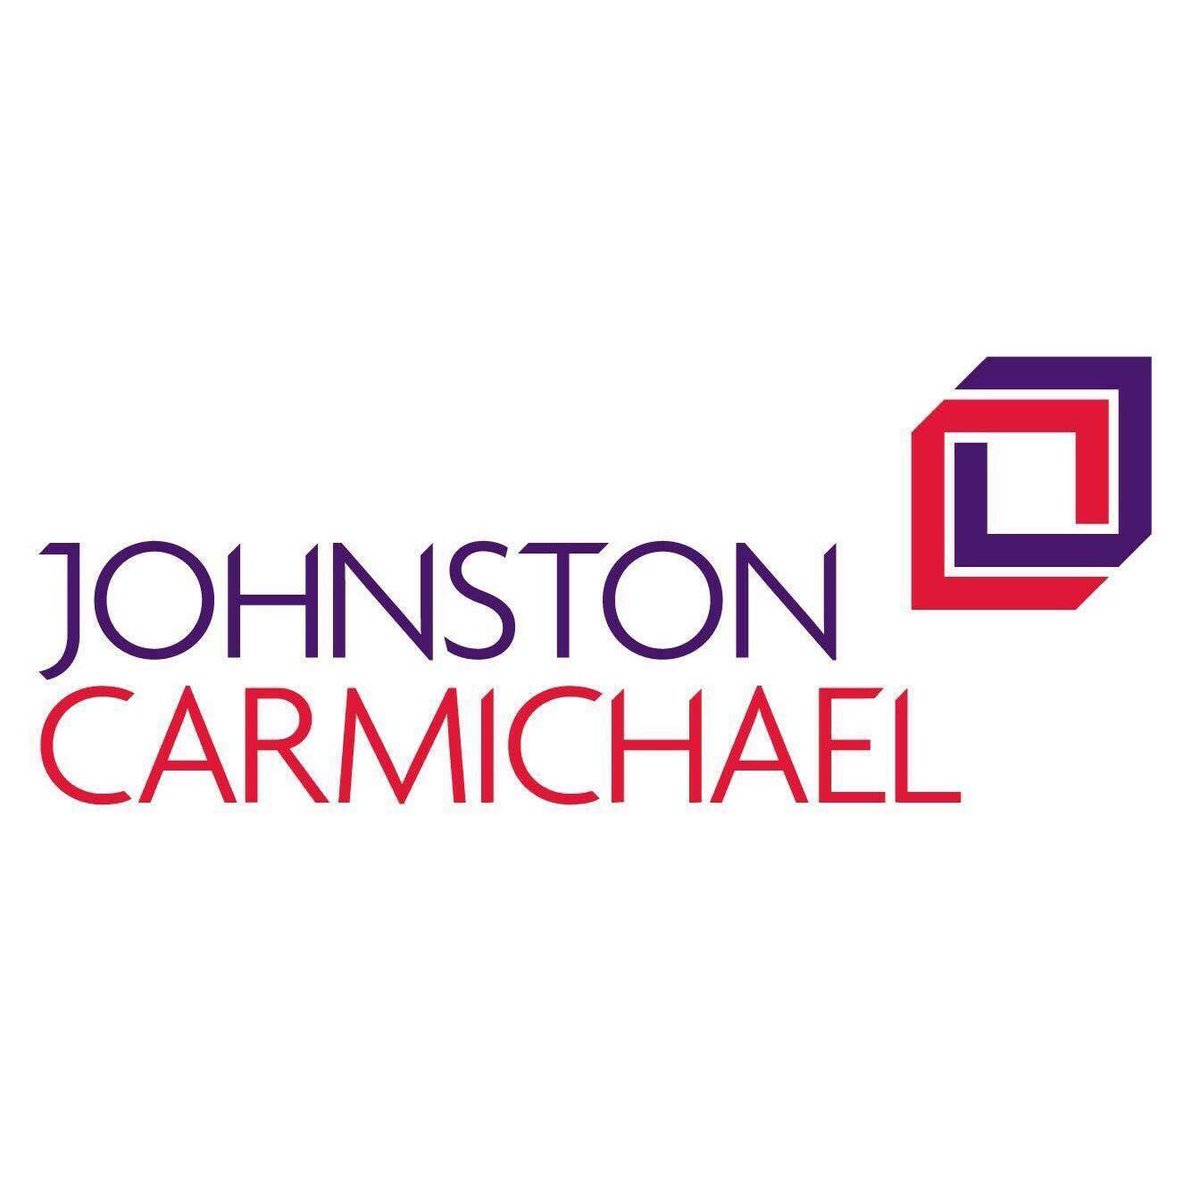 Again, proudly sponsoring the 'Businessman of the Year' award is the largest independant firm of chartered accountants in Scotland, Johnston Carmichael👨🏻‍💻

Do you know a Businessman that deserves appreciation for their hard work? Nominate them here> niamh35.typeform.com/to/JQ16Tp